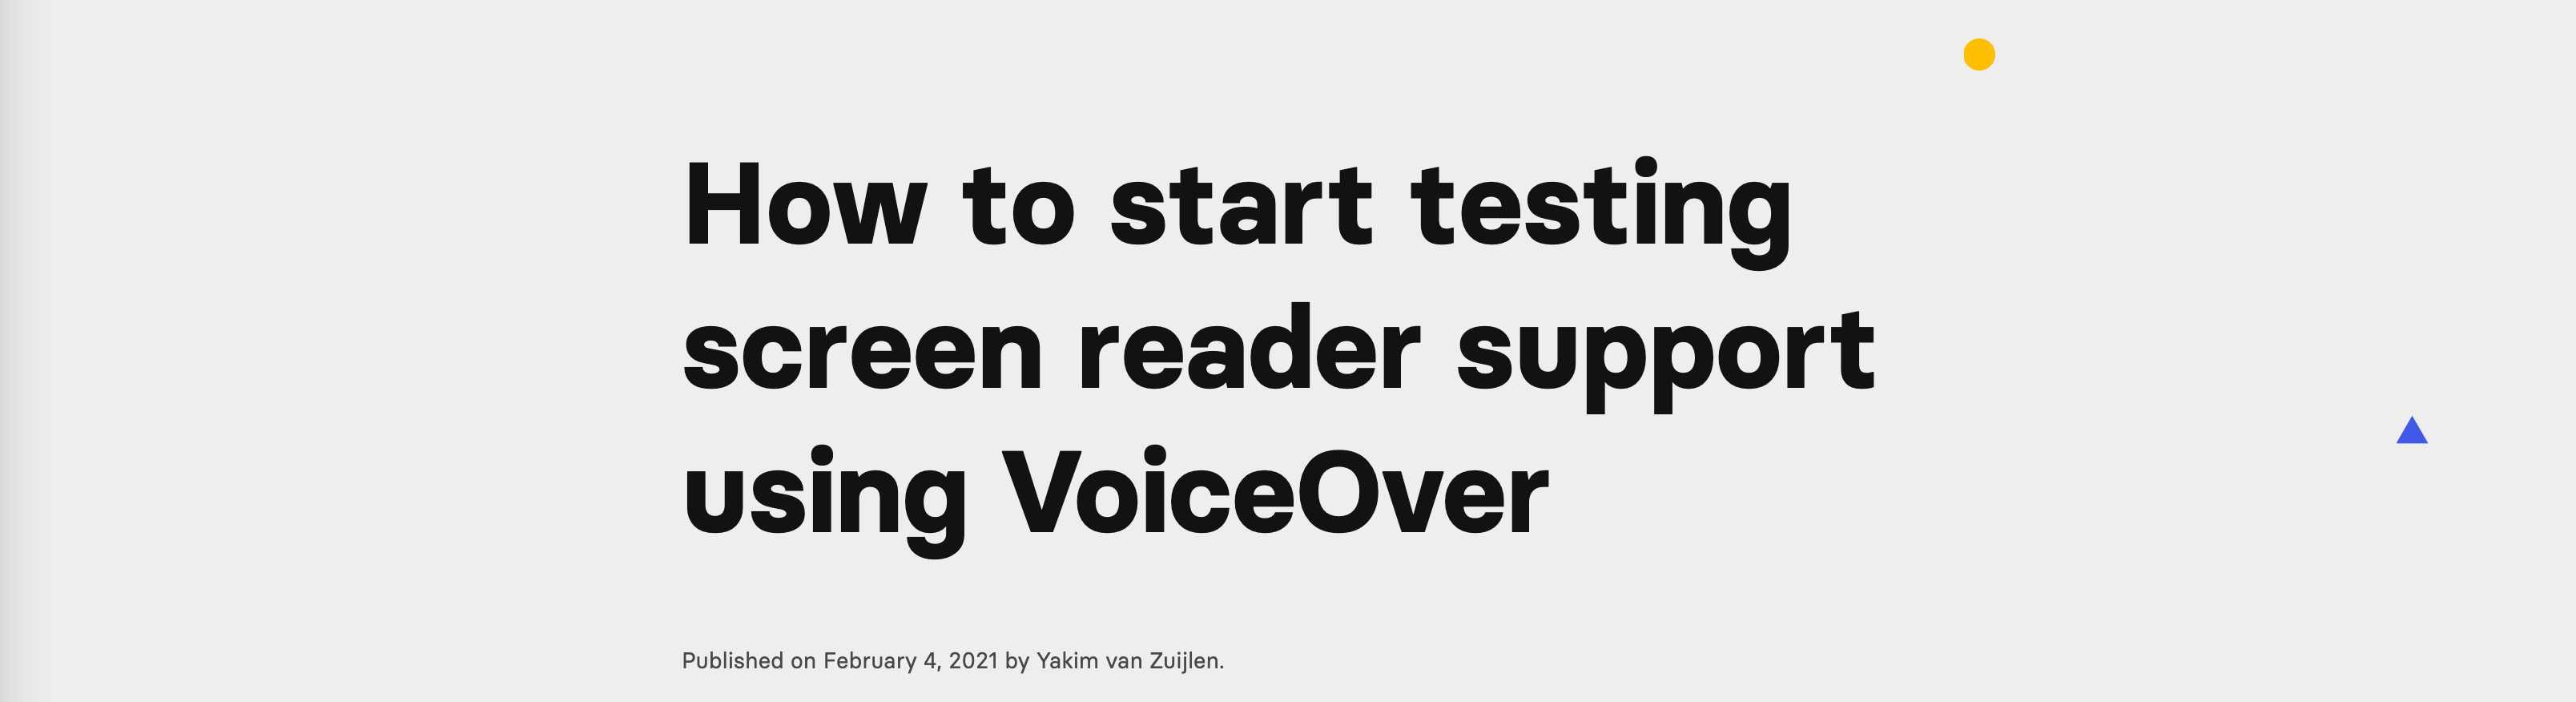 How to start testing screen reader support using VoiceOver